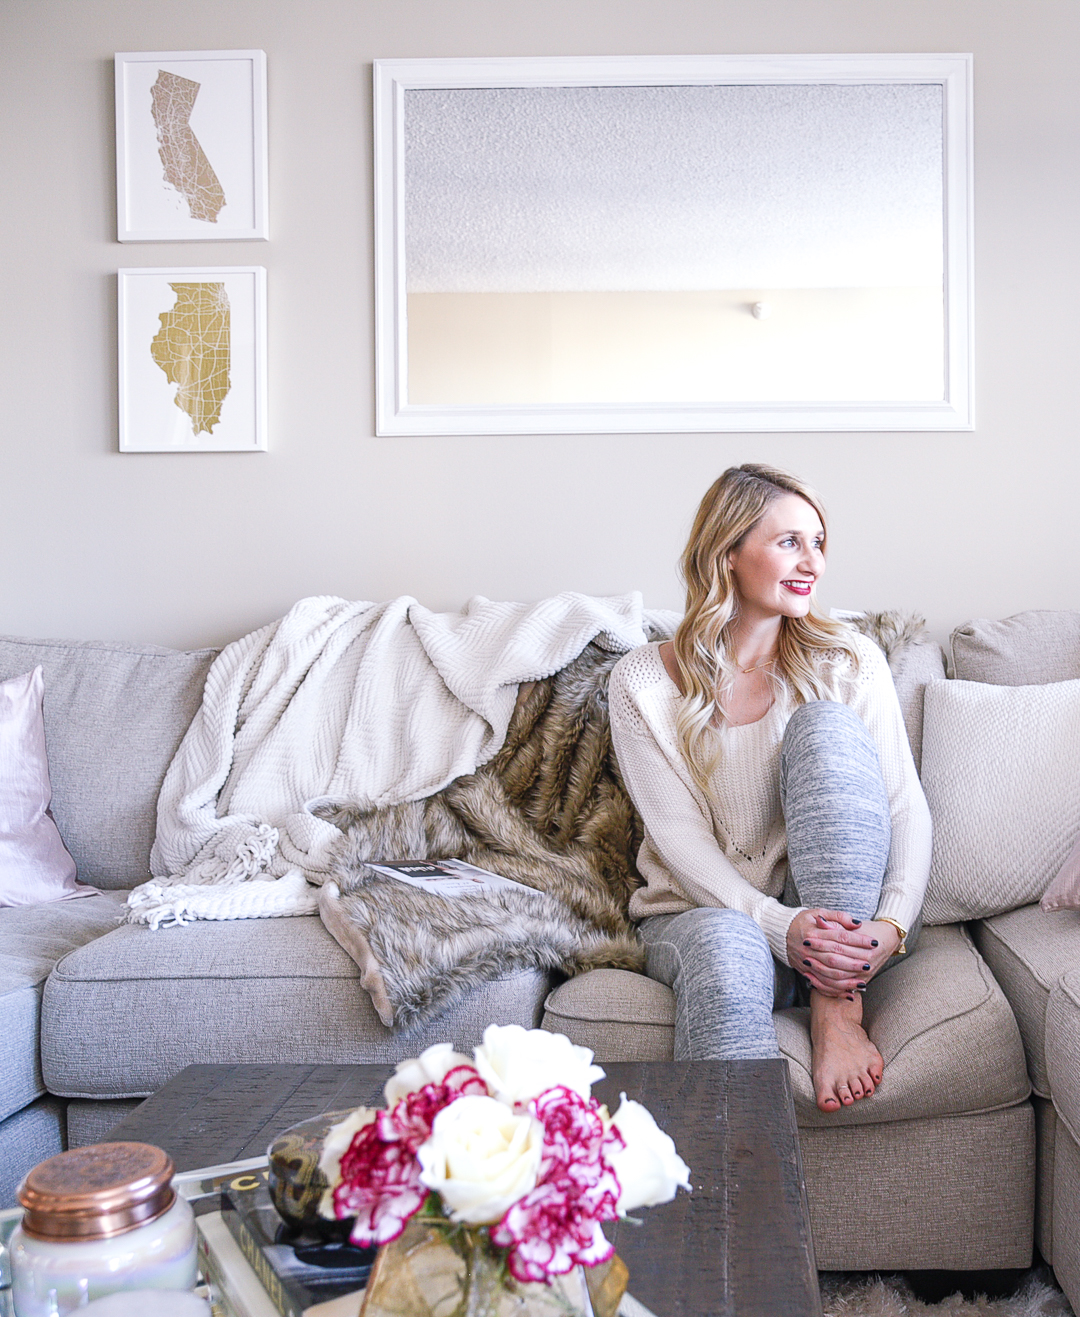 Fall Refresh A Living Room with Ashley HomeStore   Visions of Vogue